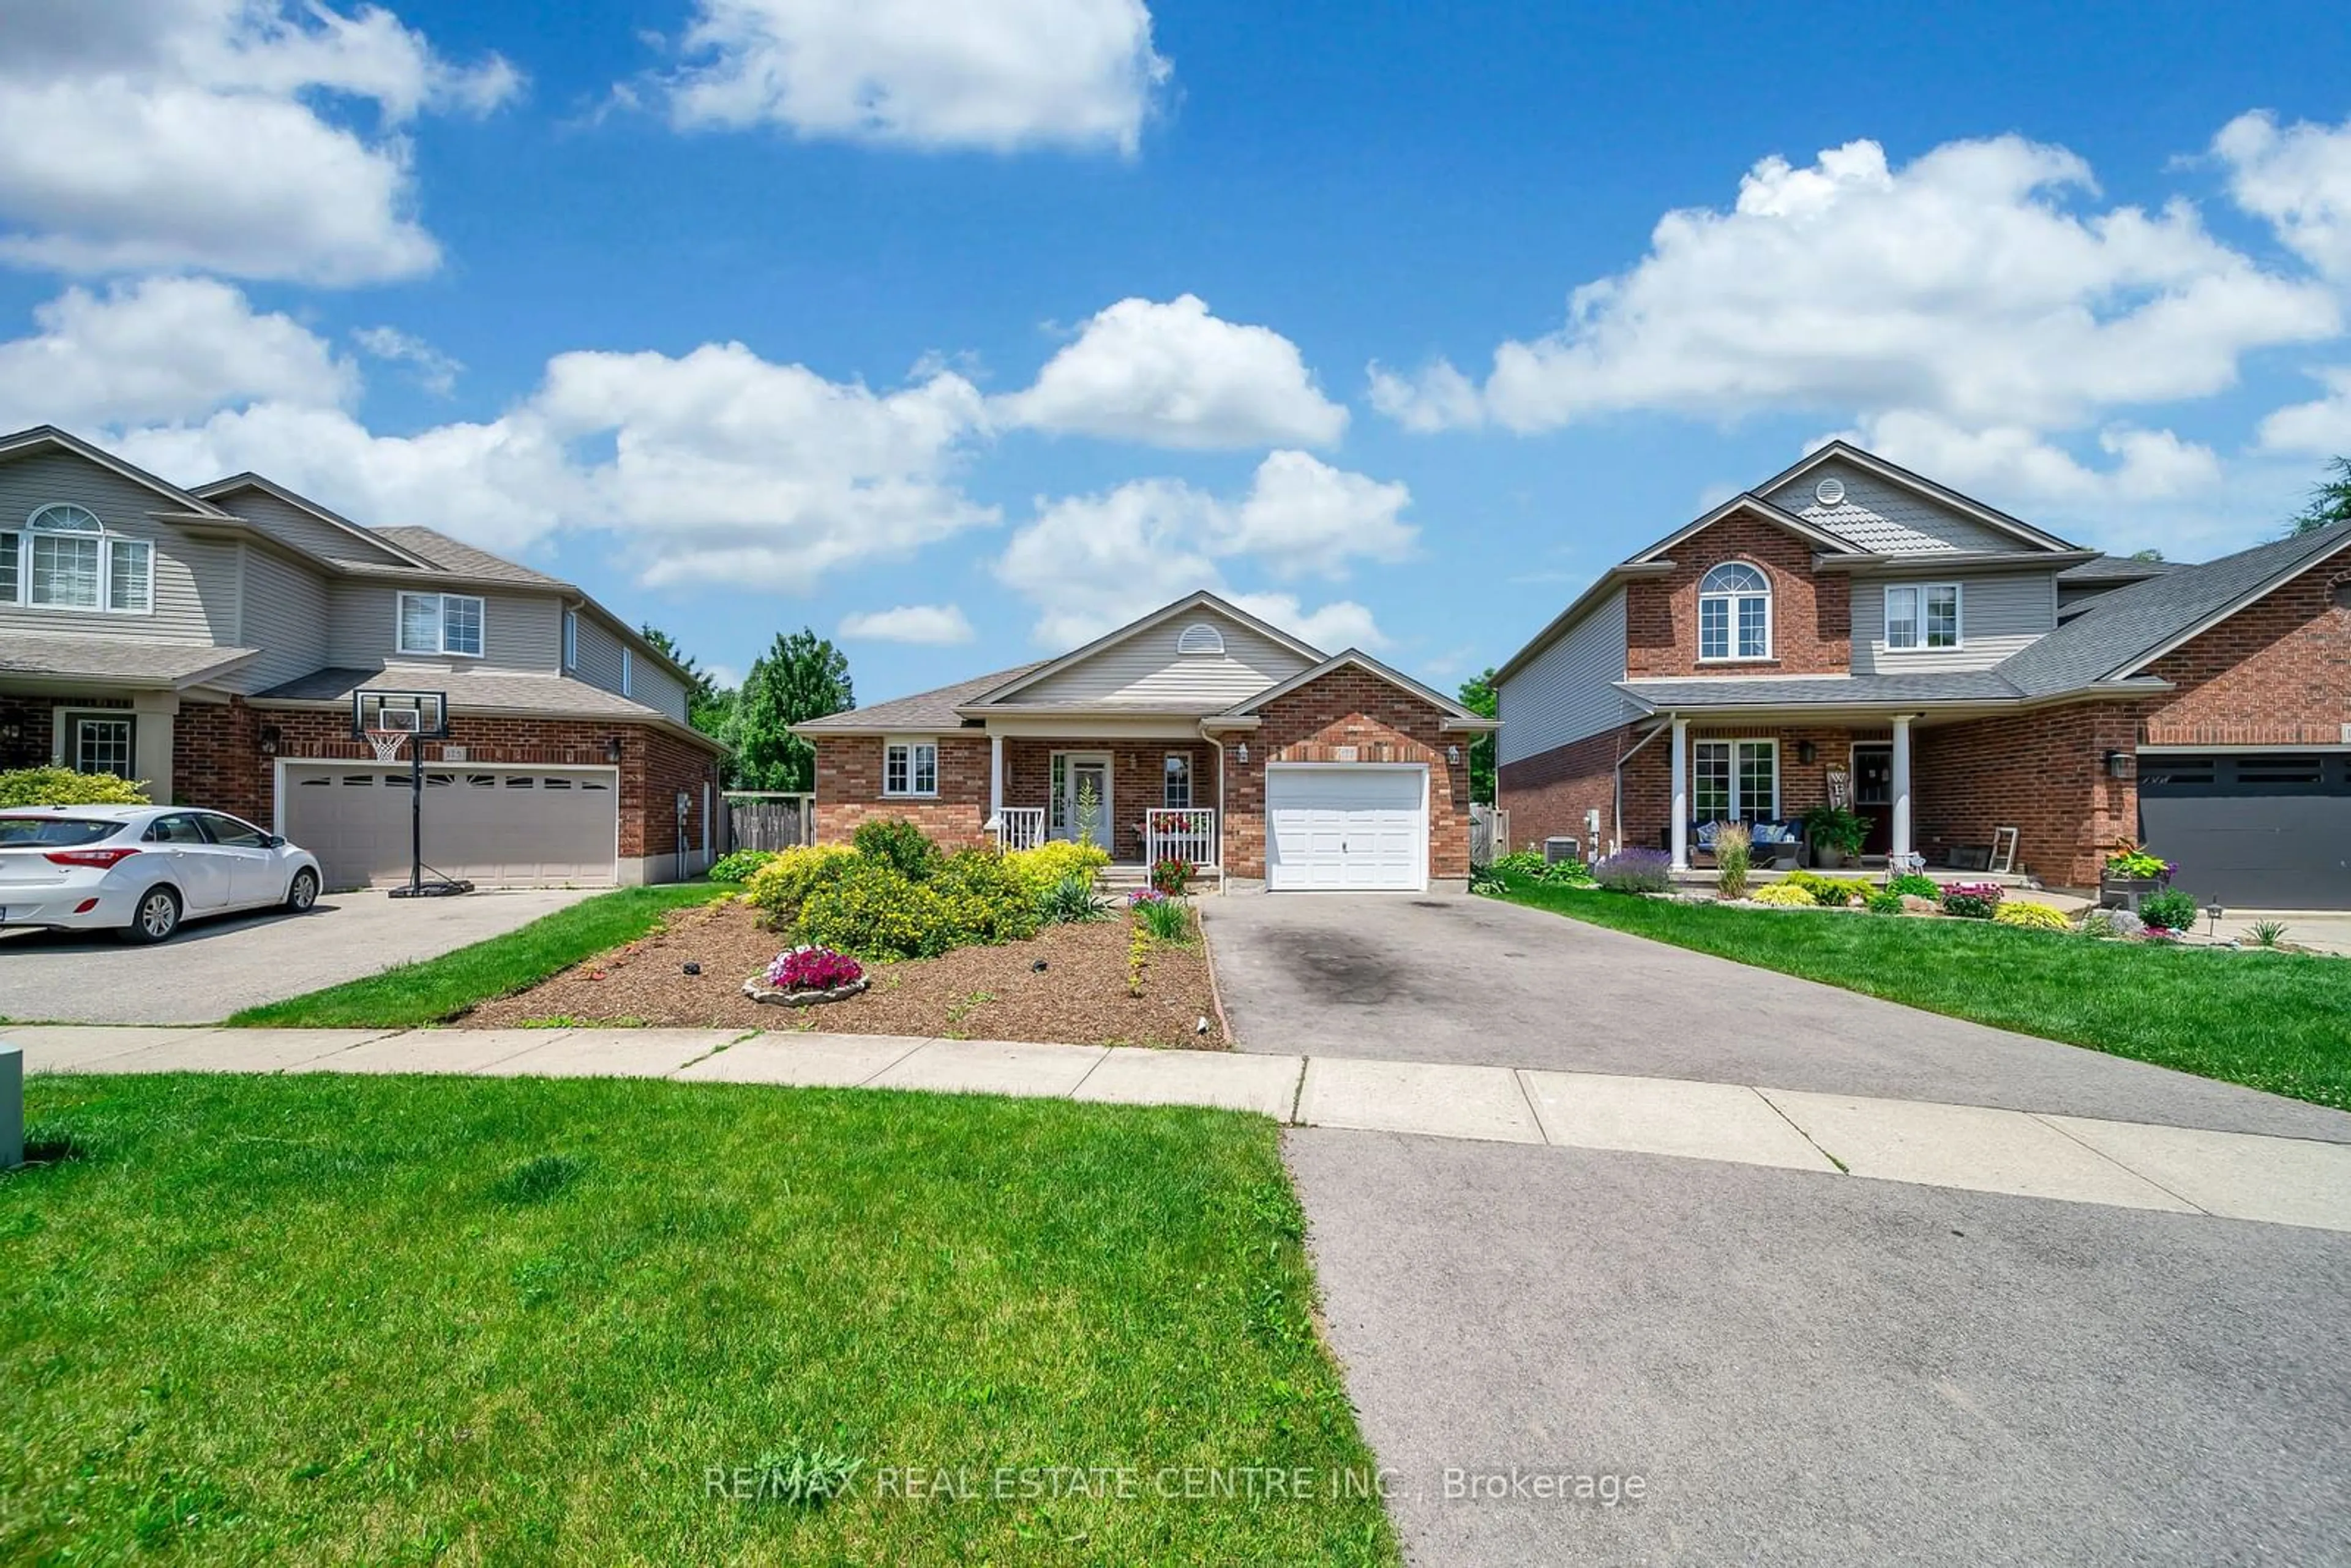 Frontside or backside of a home for 177 STIEFELMEYER Cres, Wilmot Ontario N3A 4L5